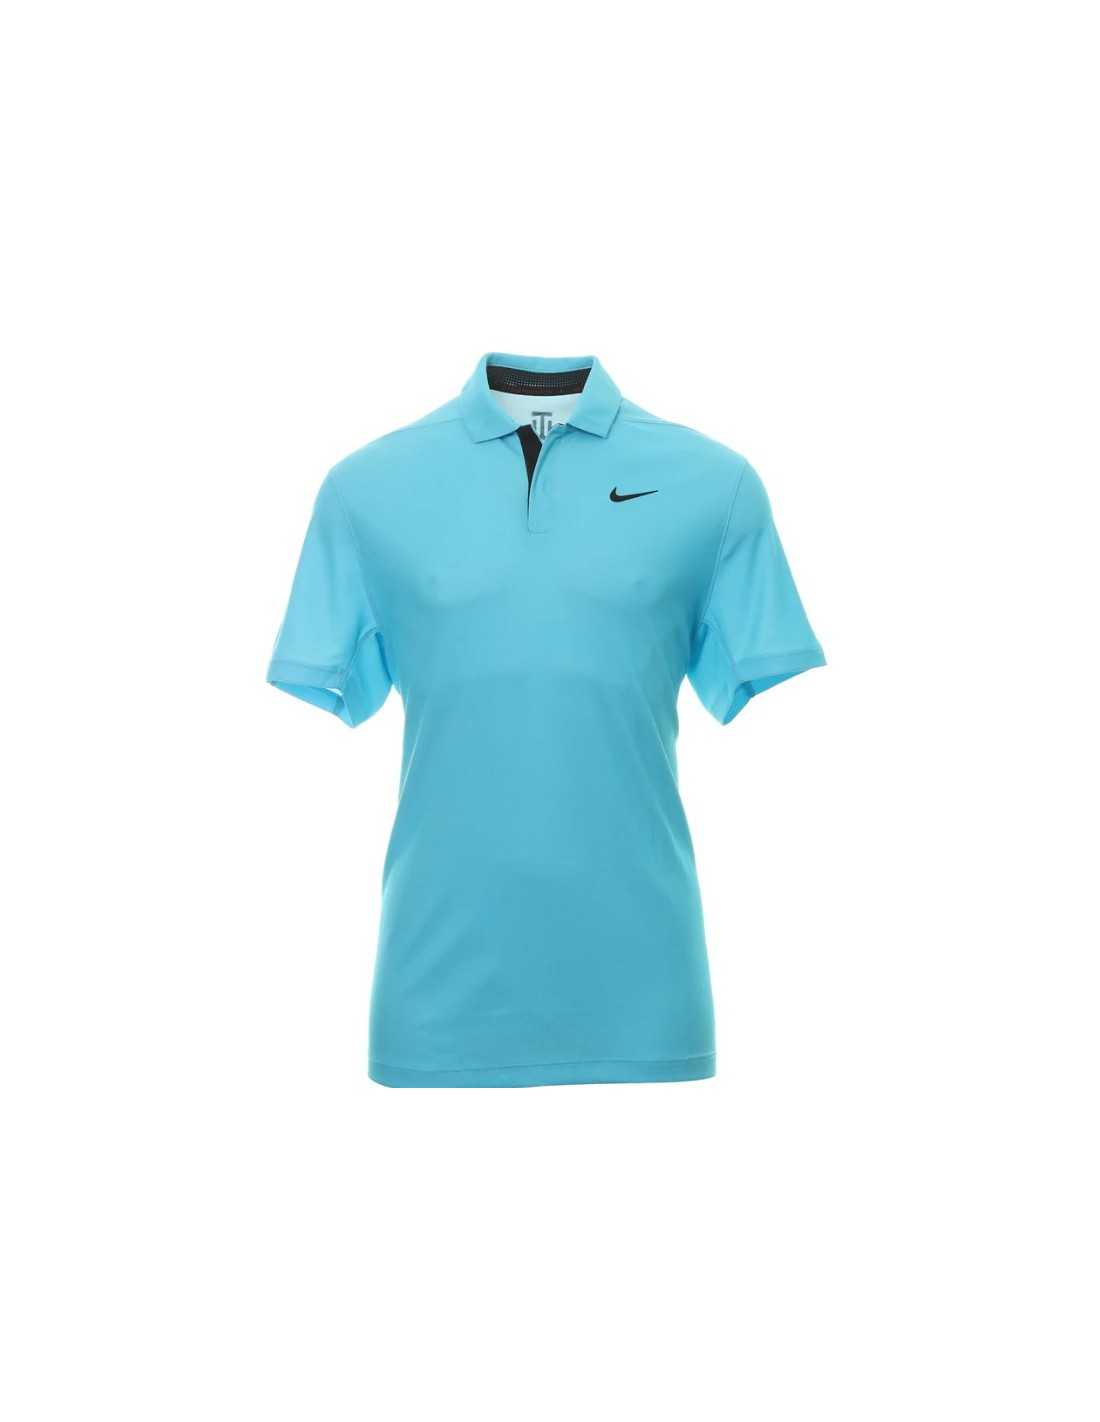 NIKE DRI-FIT TIGER WOODS BLUE - MEN'S POLO - Polo Golf NIKE - The Golf ...